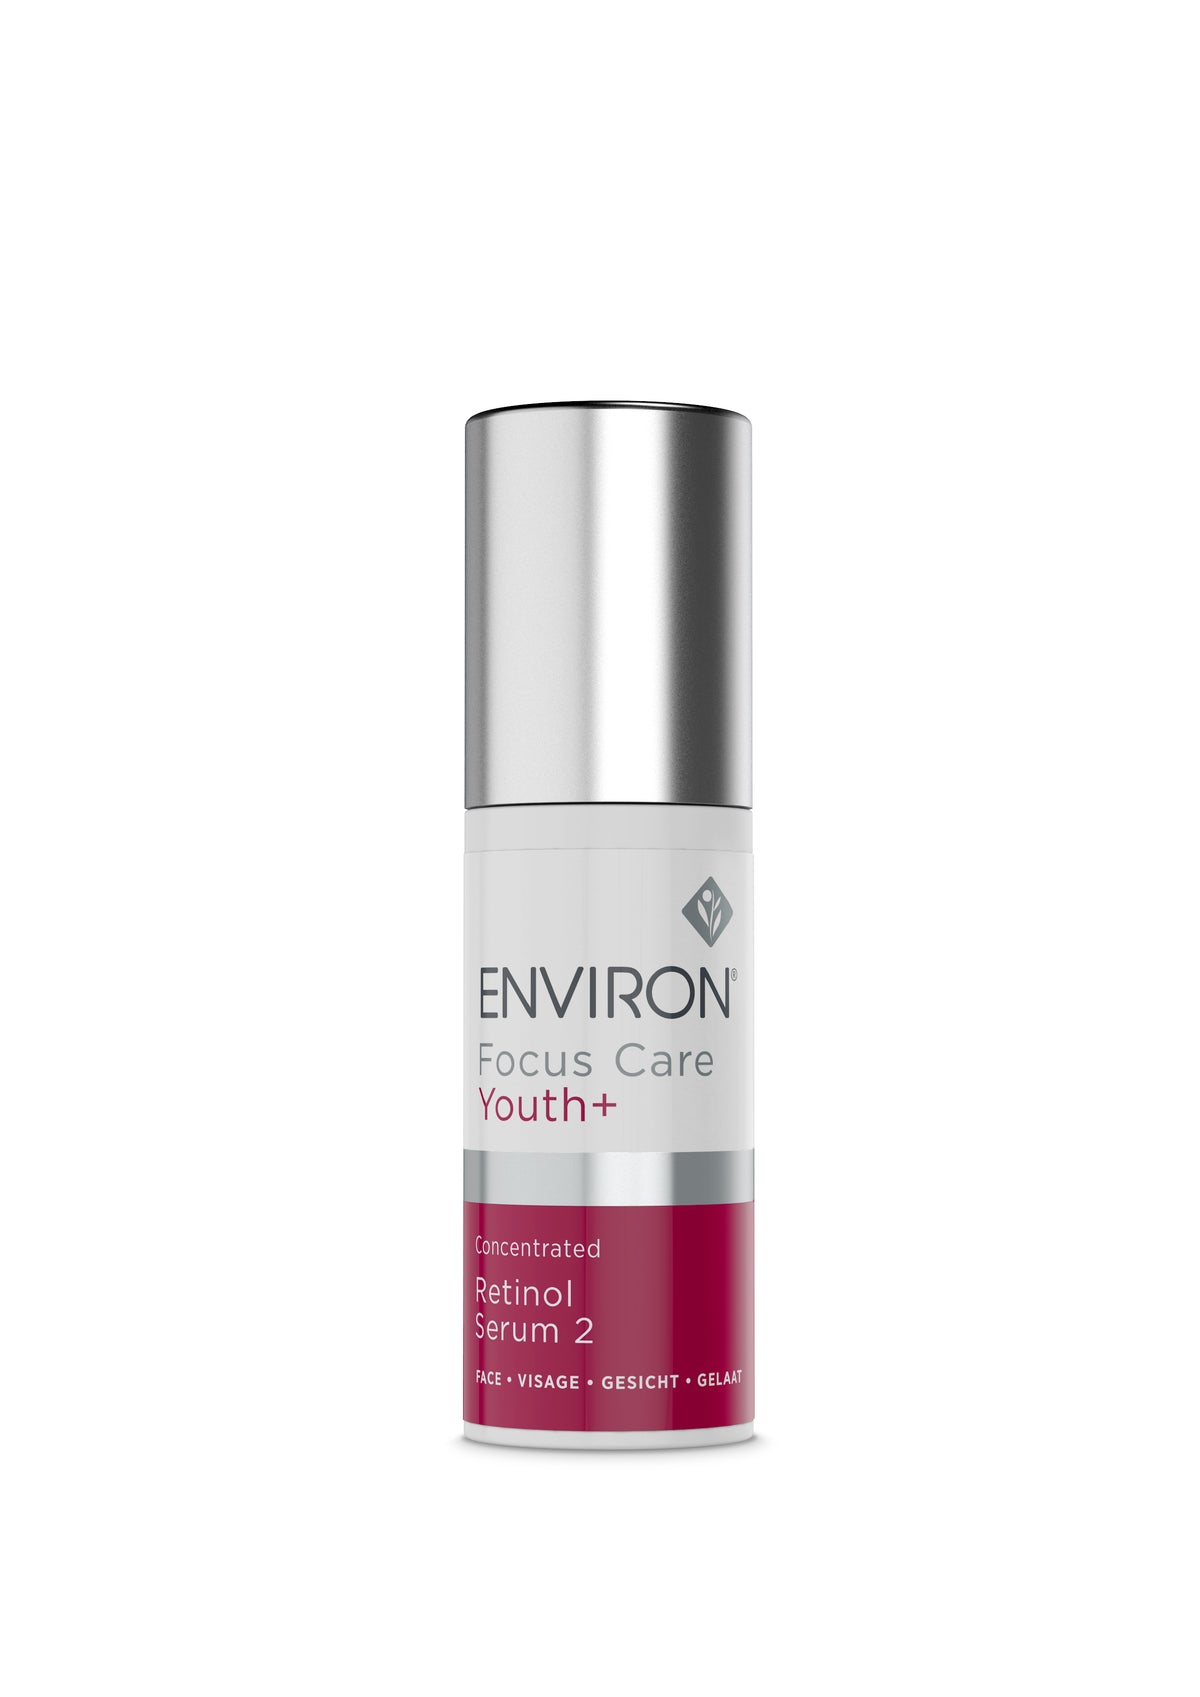 Environ Focus Care Youth + Concentrated Retinol Serum 2